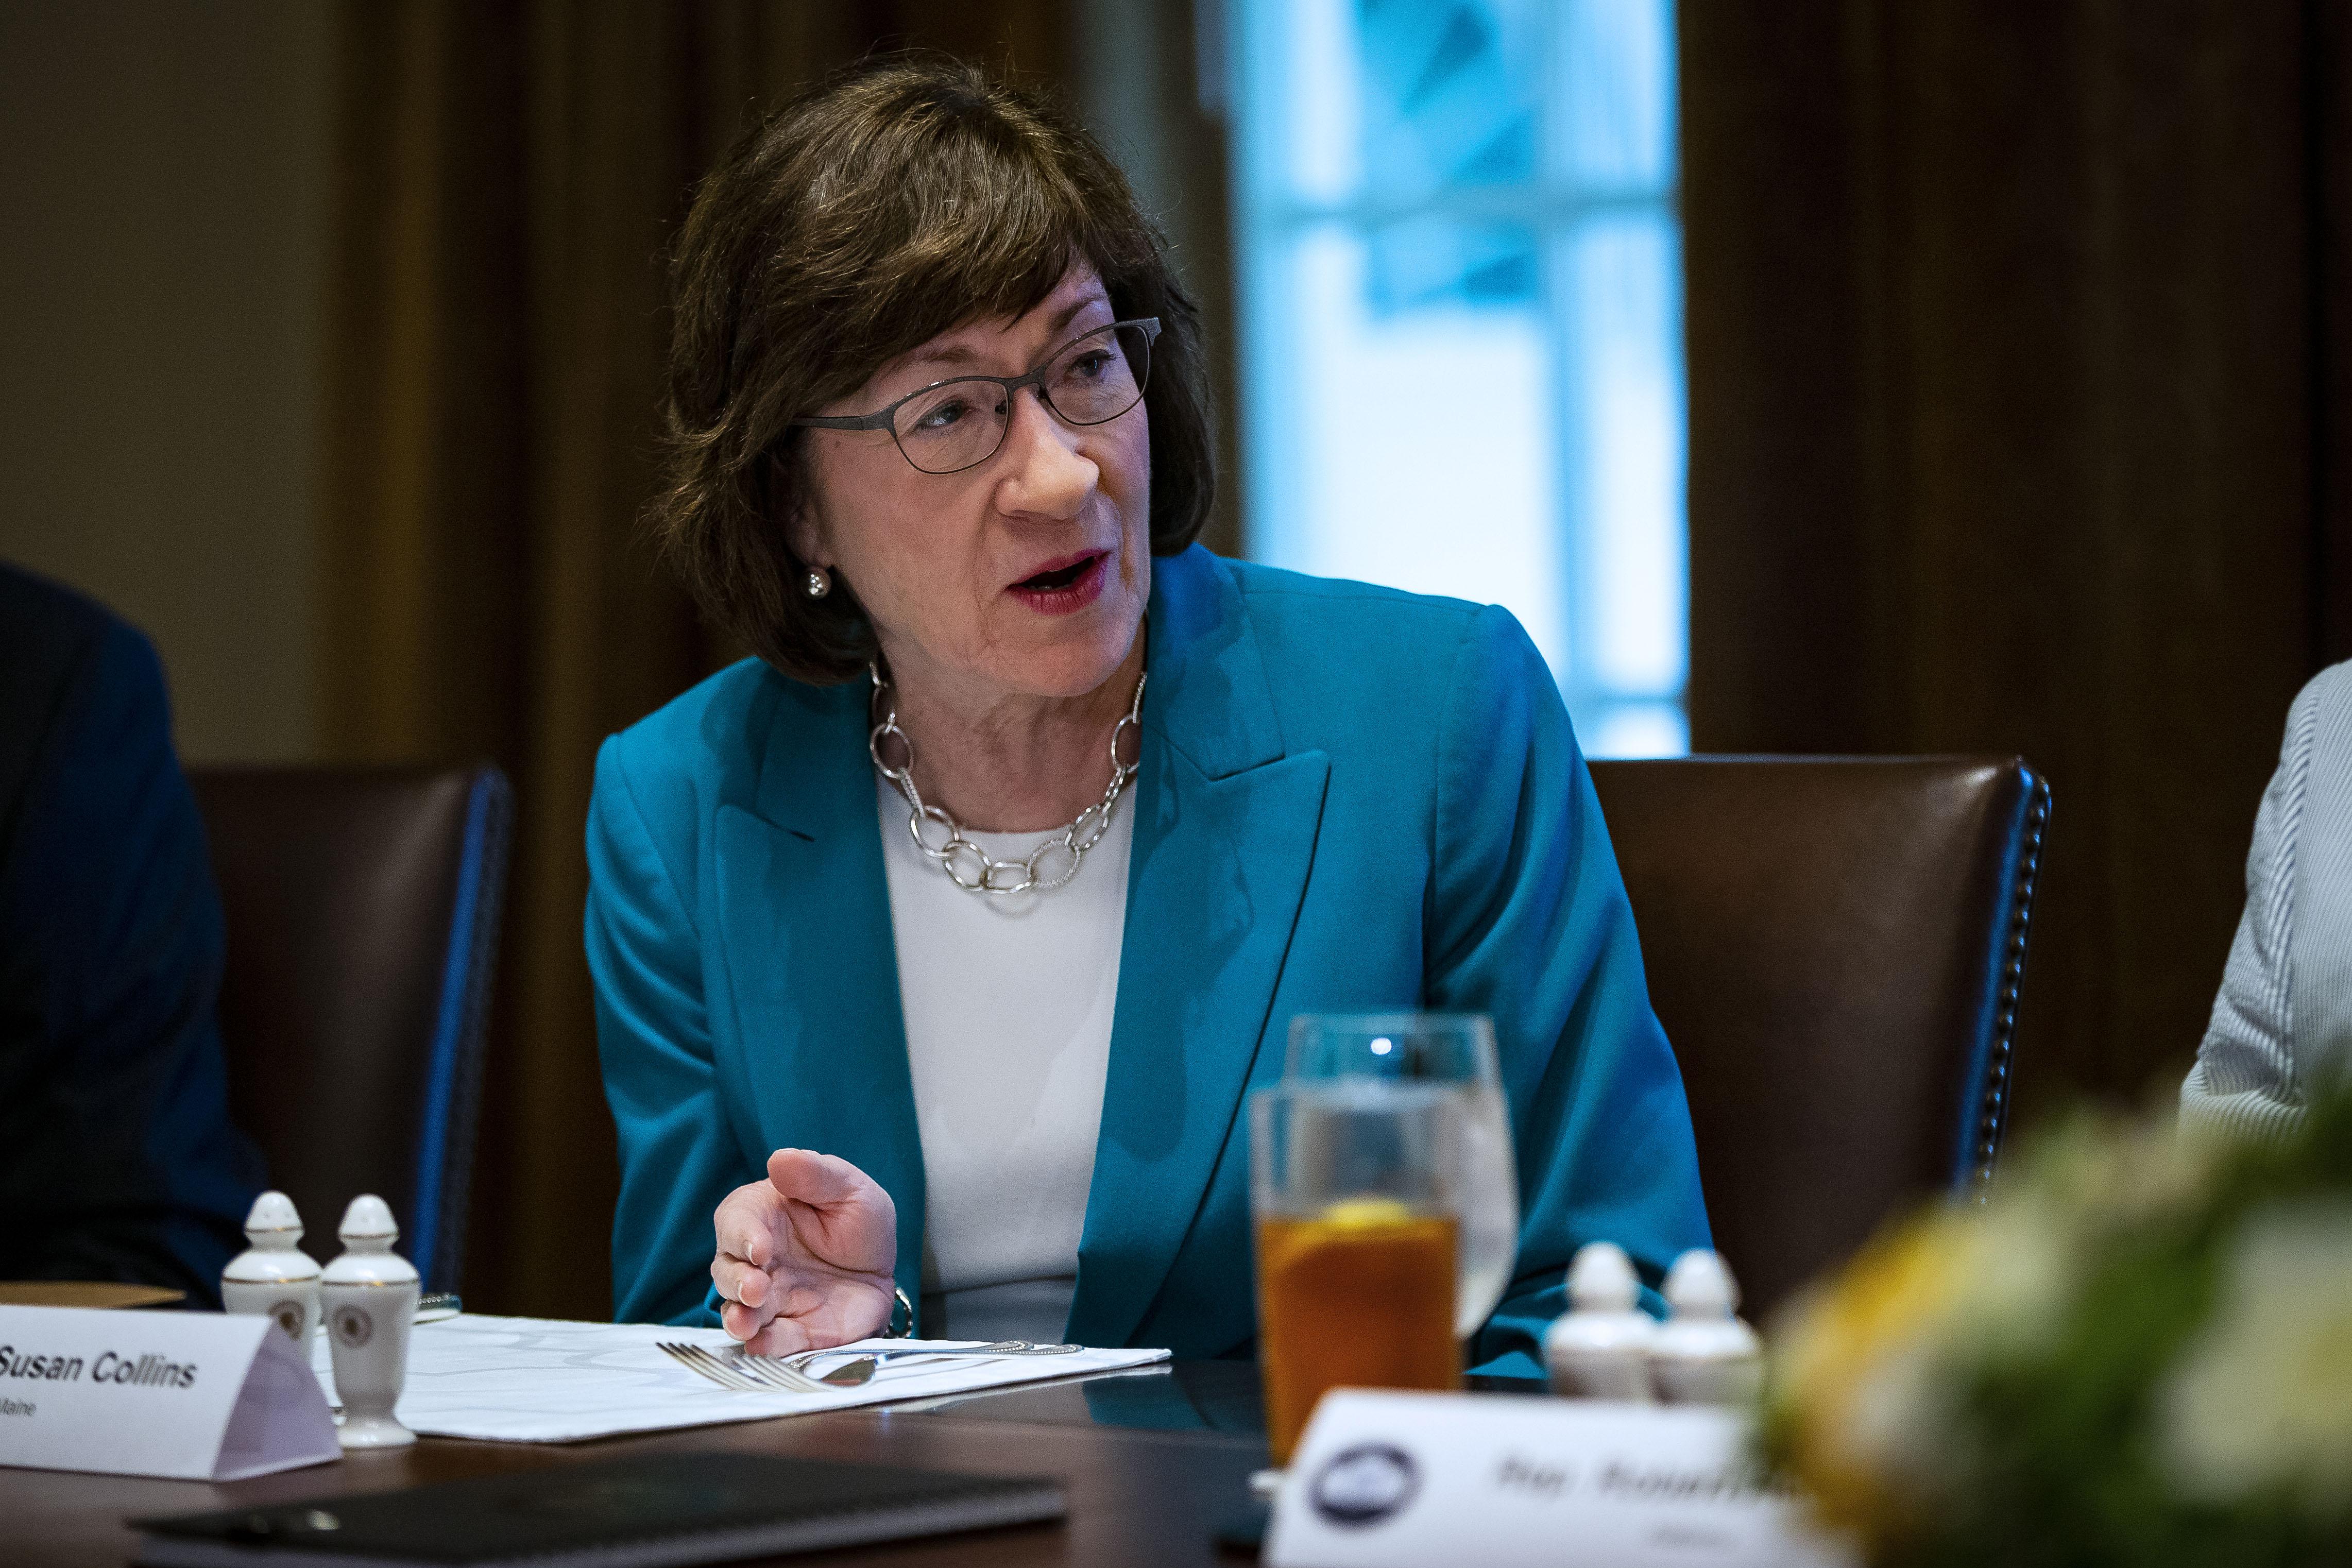 Sen. Susan Collins (R-ME) attends a lunch meeting for Republican lawmakers in the Cabinet Room at the White House June 26, 2018 in Washington, D.C.